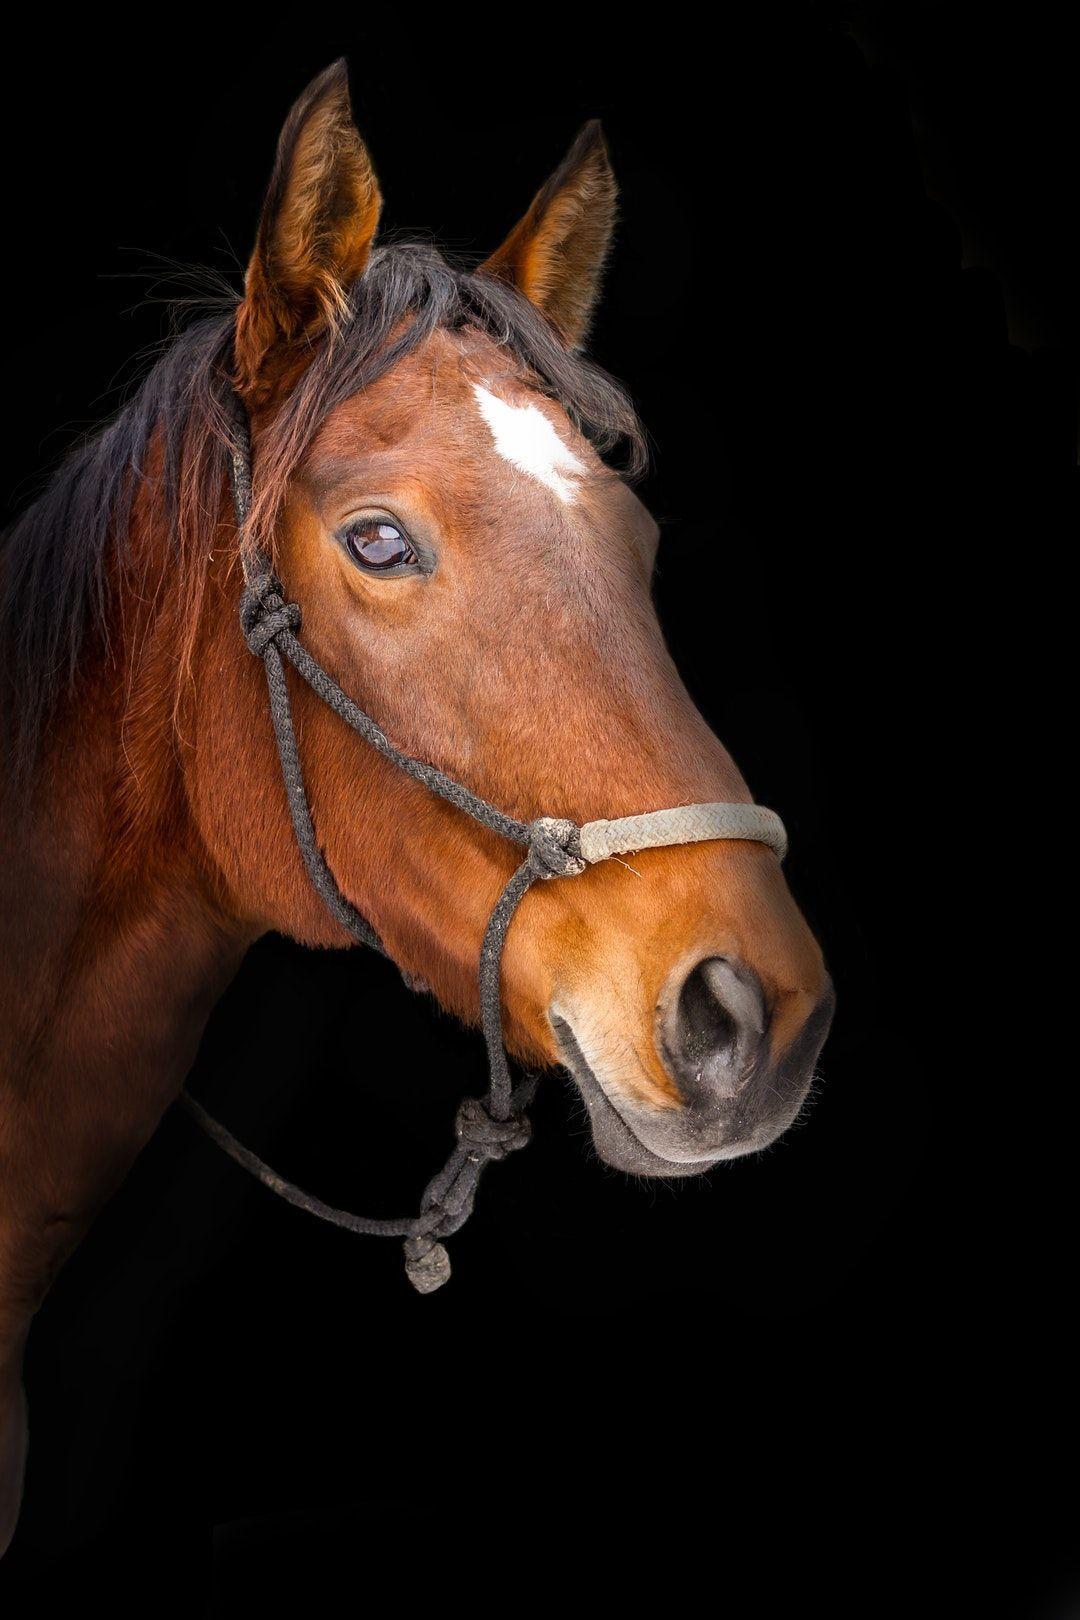 Horse Face HD Wallpapers - Top Free Horse Face HD Backgrounds ...